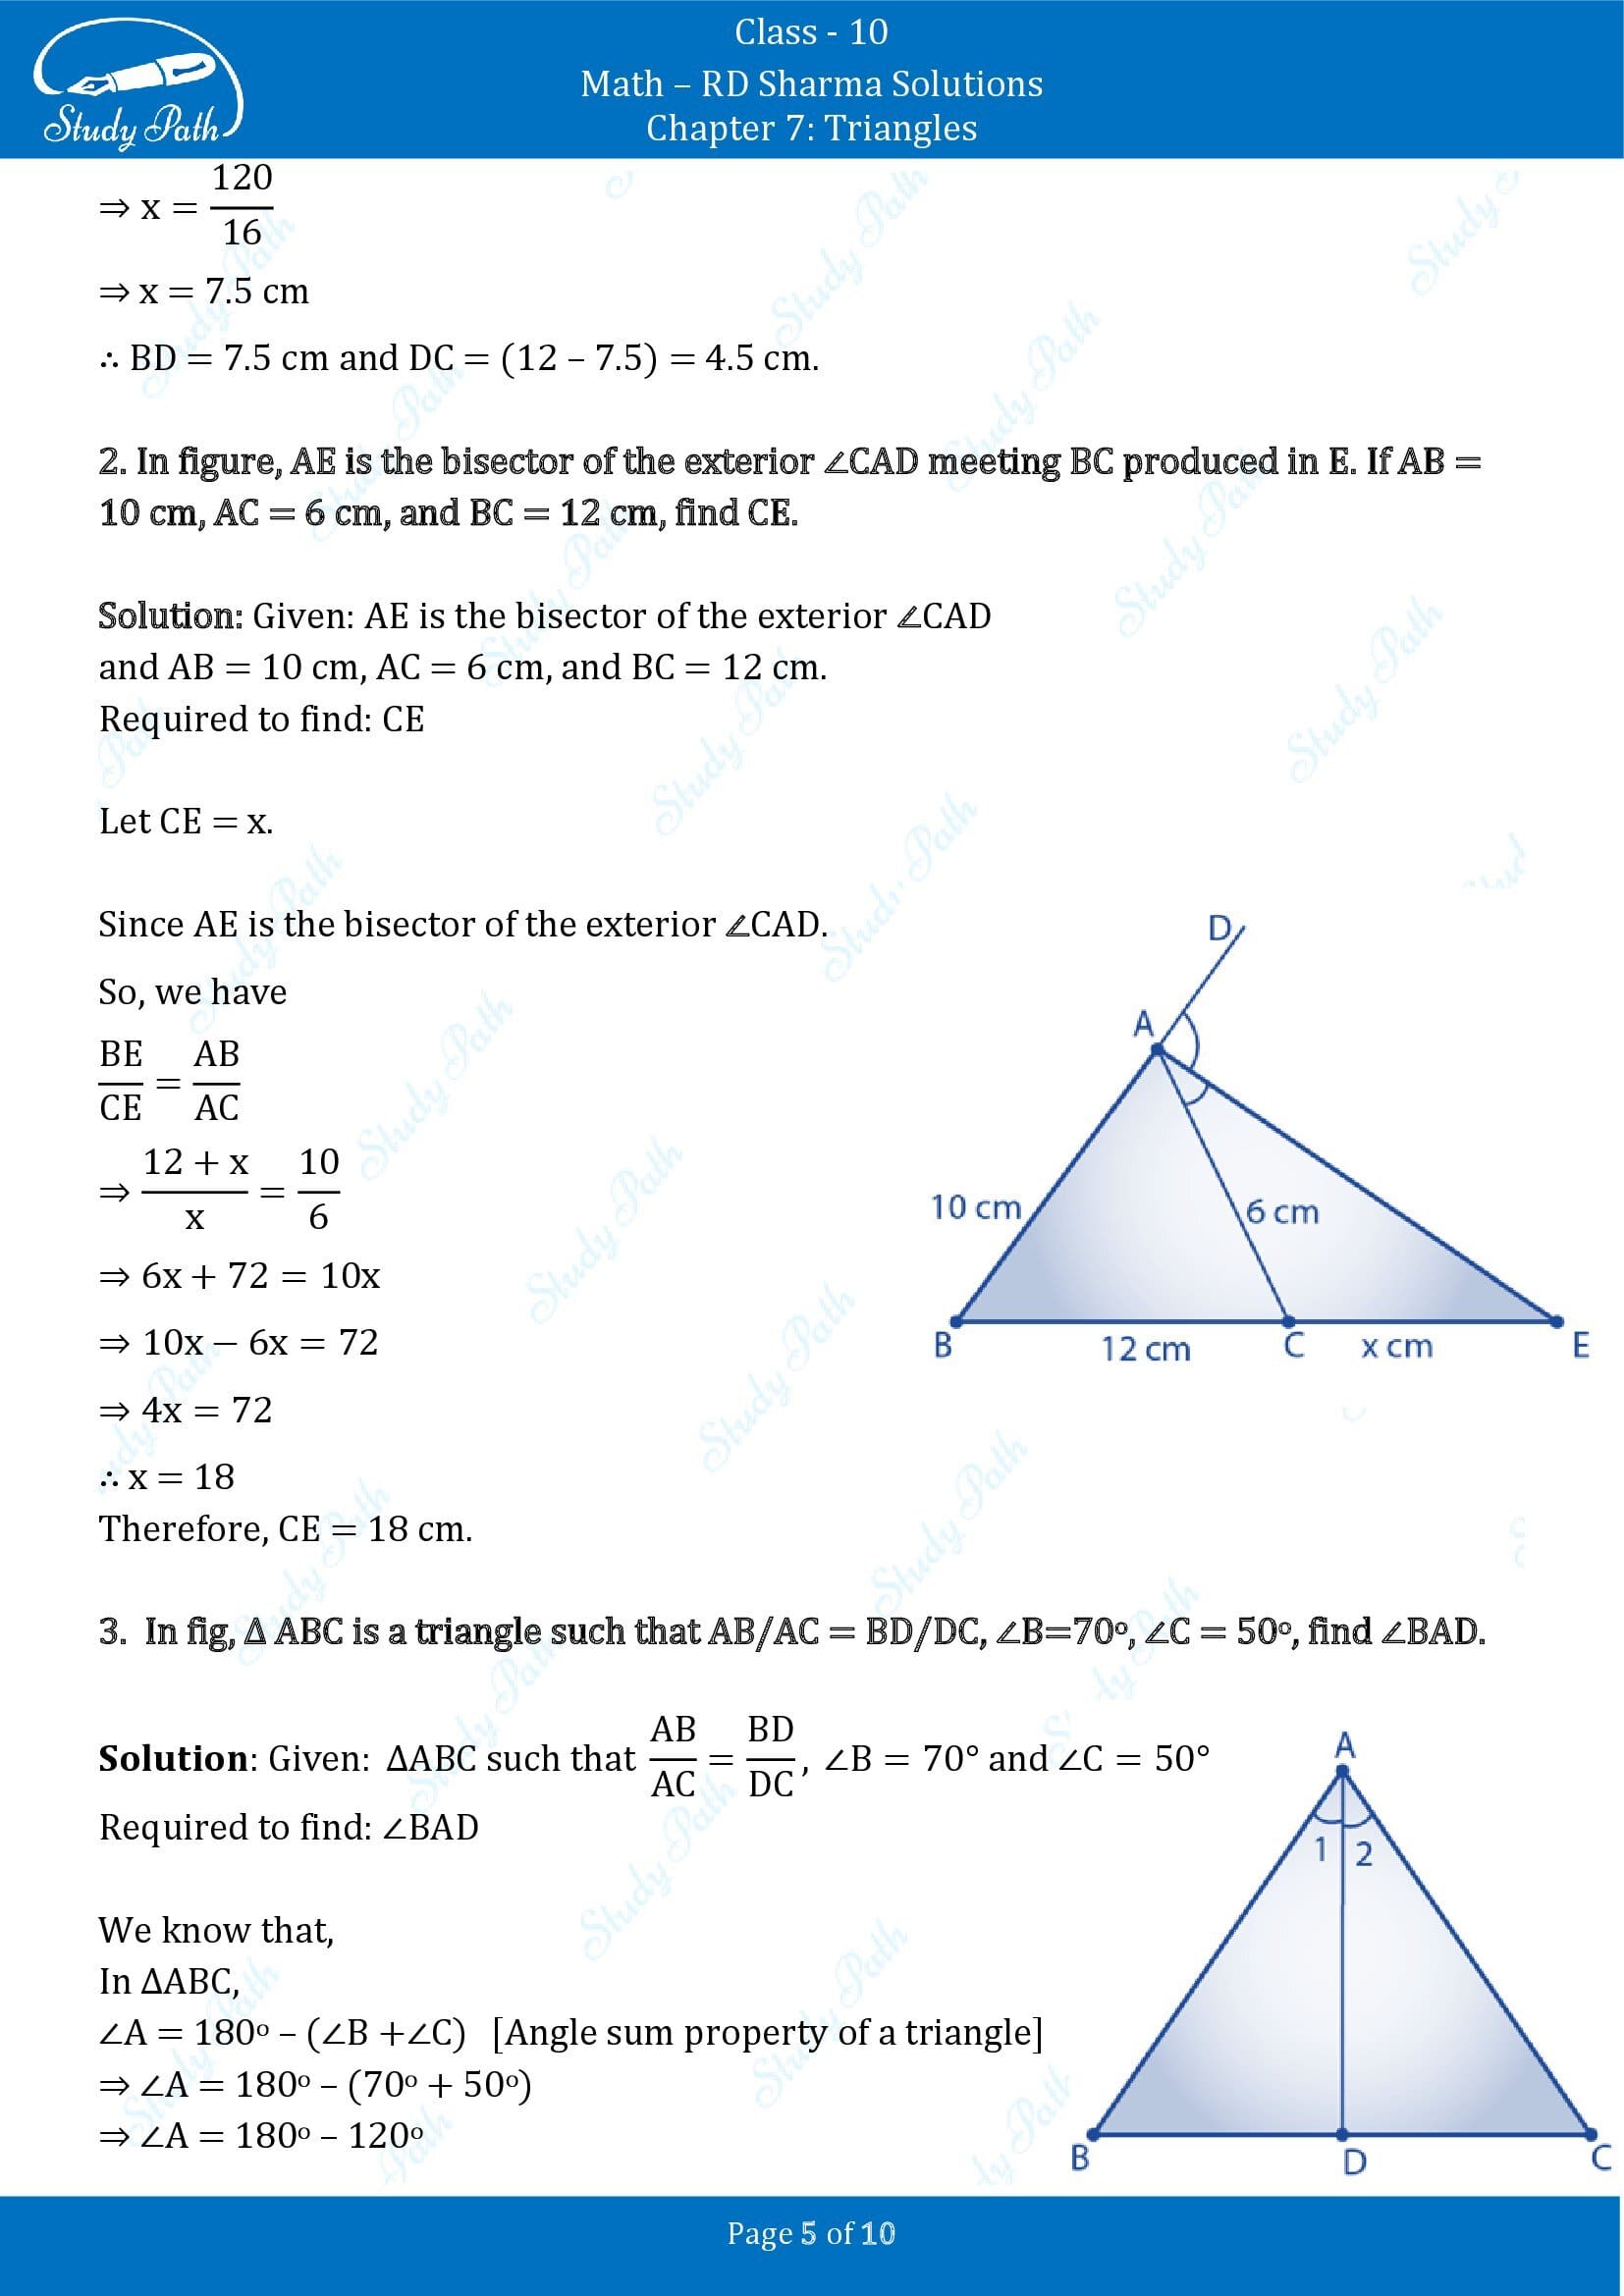 RD Sharma Solutions Class 10 Chapter 7 Triangles Exercise 7.3 00005